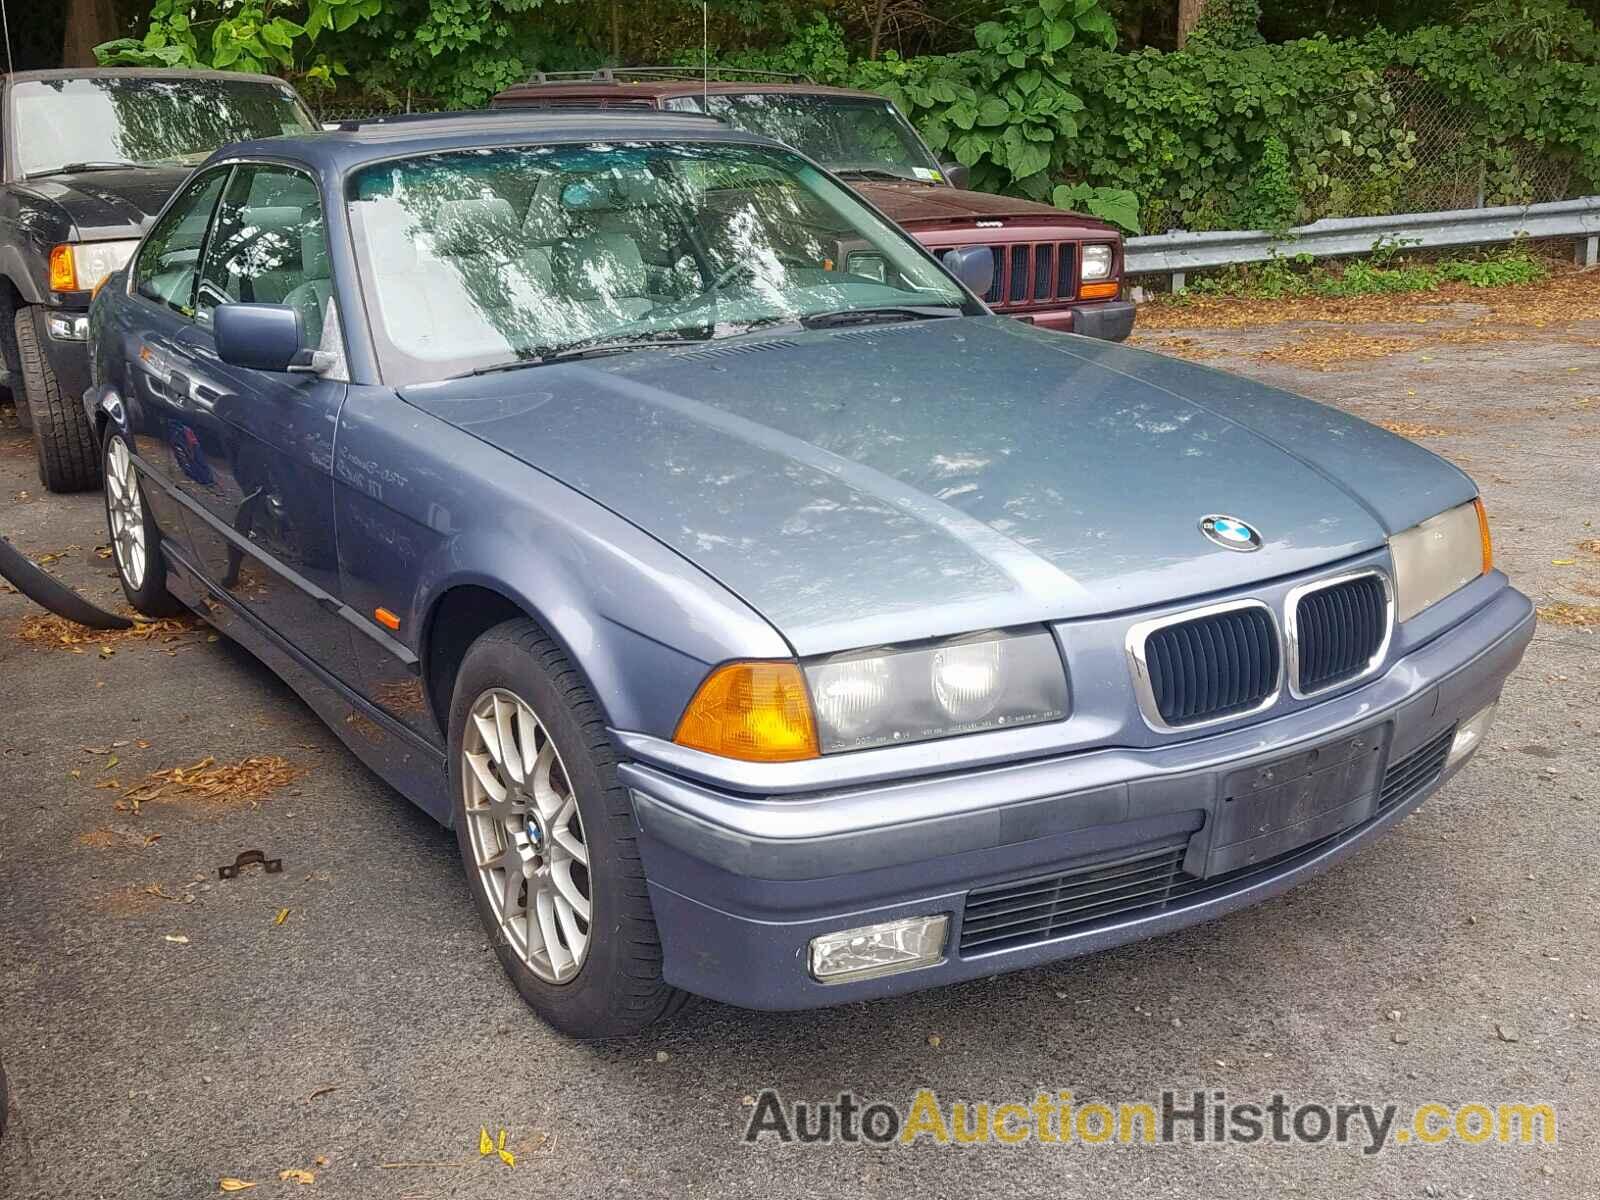 1999 BMW 328 IS AUT IS AUTOMATIC, WBABG2334XET37920